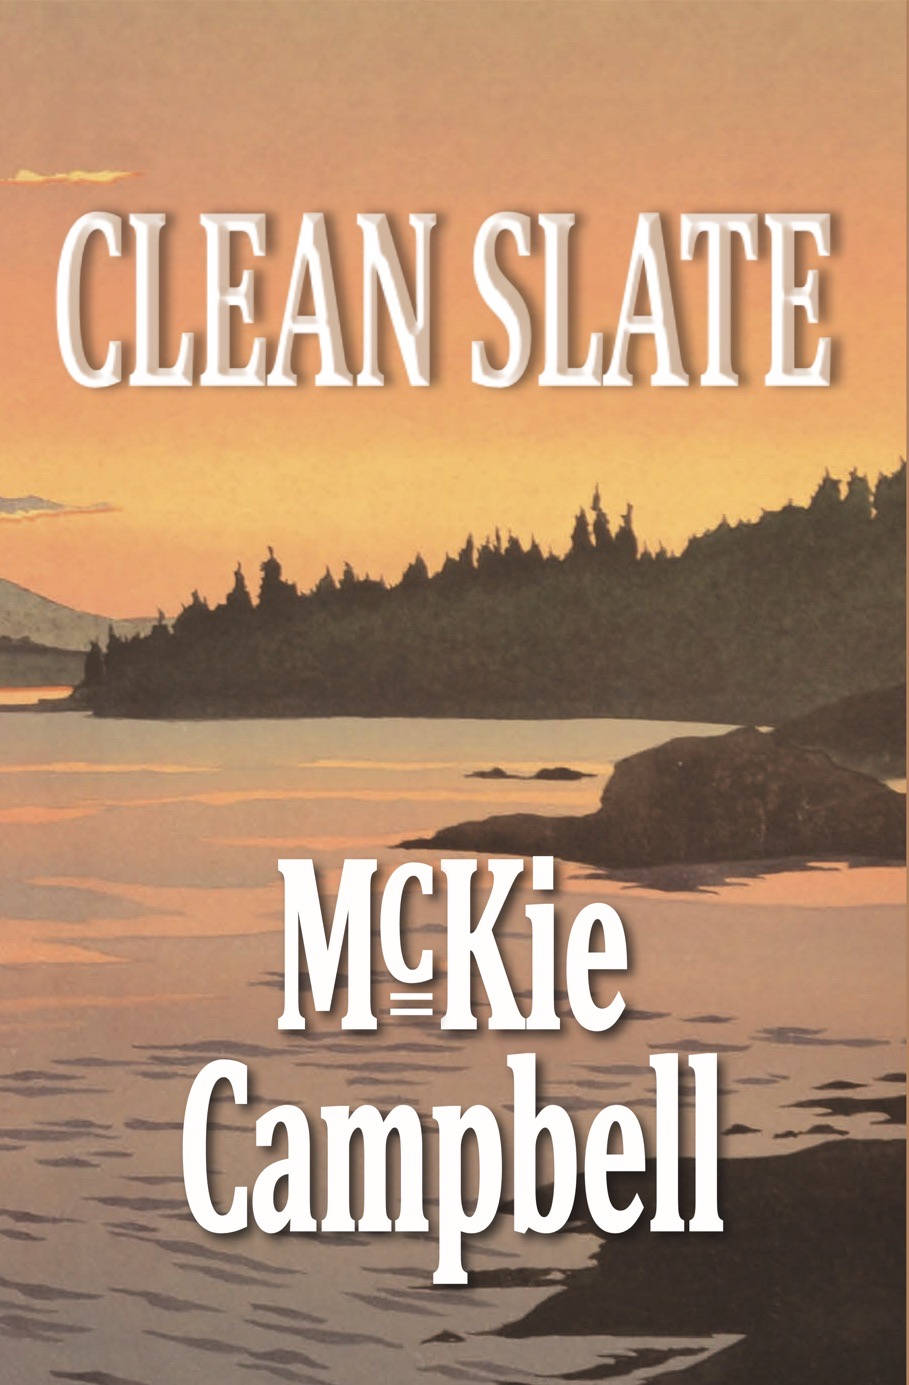 This image shows the cover to McKie Campbell’s book “Clean Slate.” Campbell said he licensed paintings by prolific Alaskan artist Byron Birdsall, now deceased, for his book covers. (Courest Image)